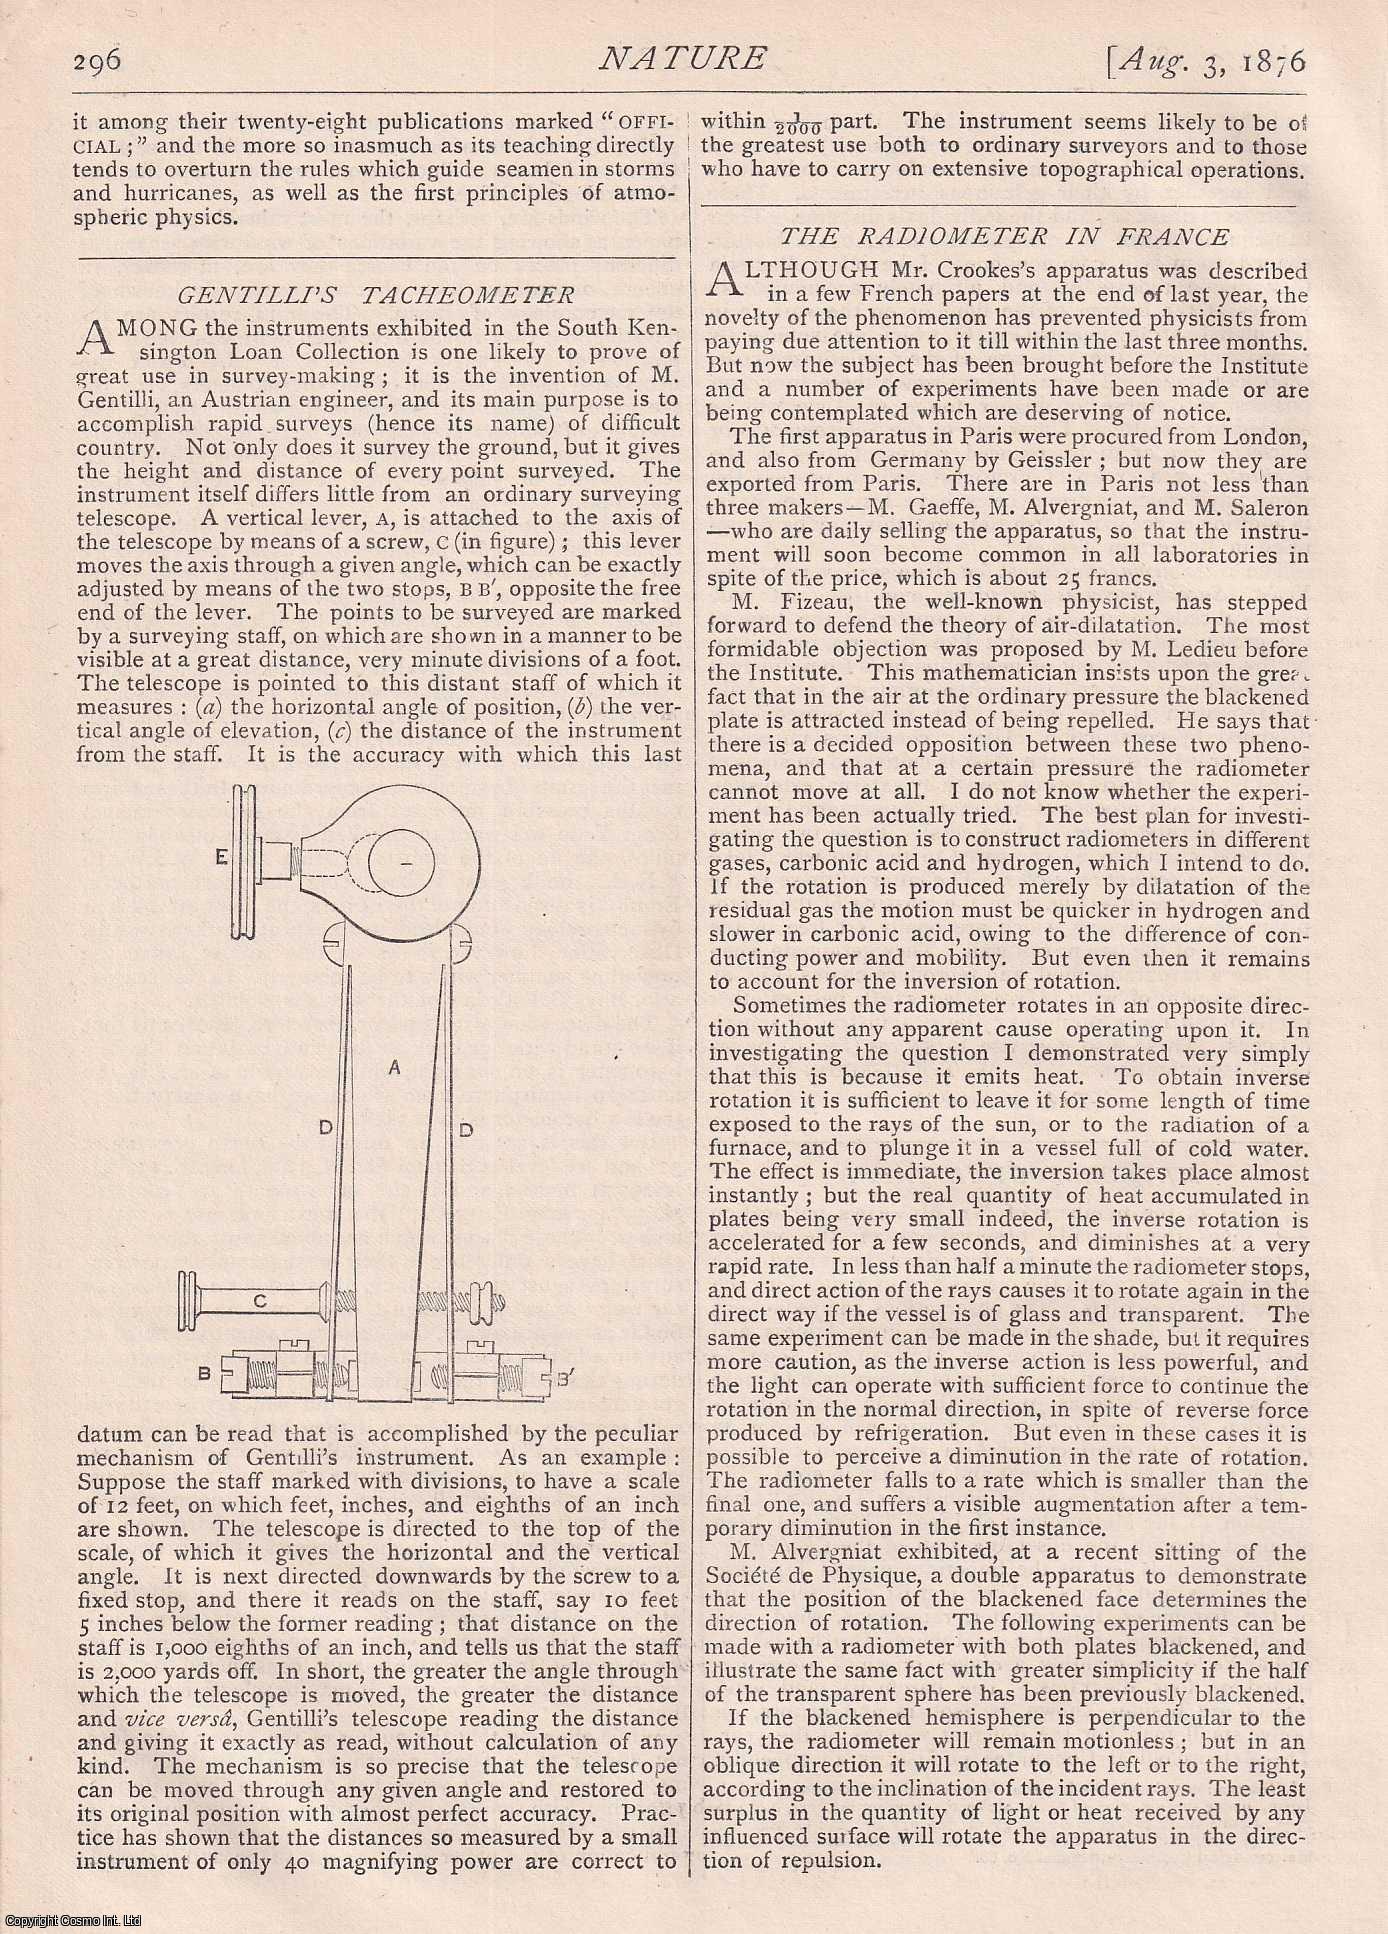 NATURE - The Radiometer in France by W. de Fonvielle, pp296-297 in Nature, Volume 14, Number 353. Nature. A Weekly Journal of Science. Thursday, August 3rd, 1876.